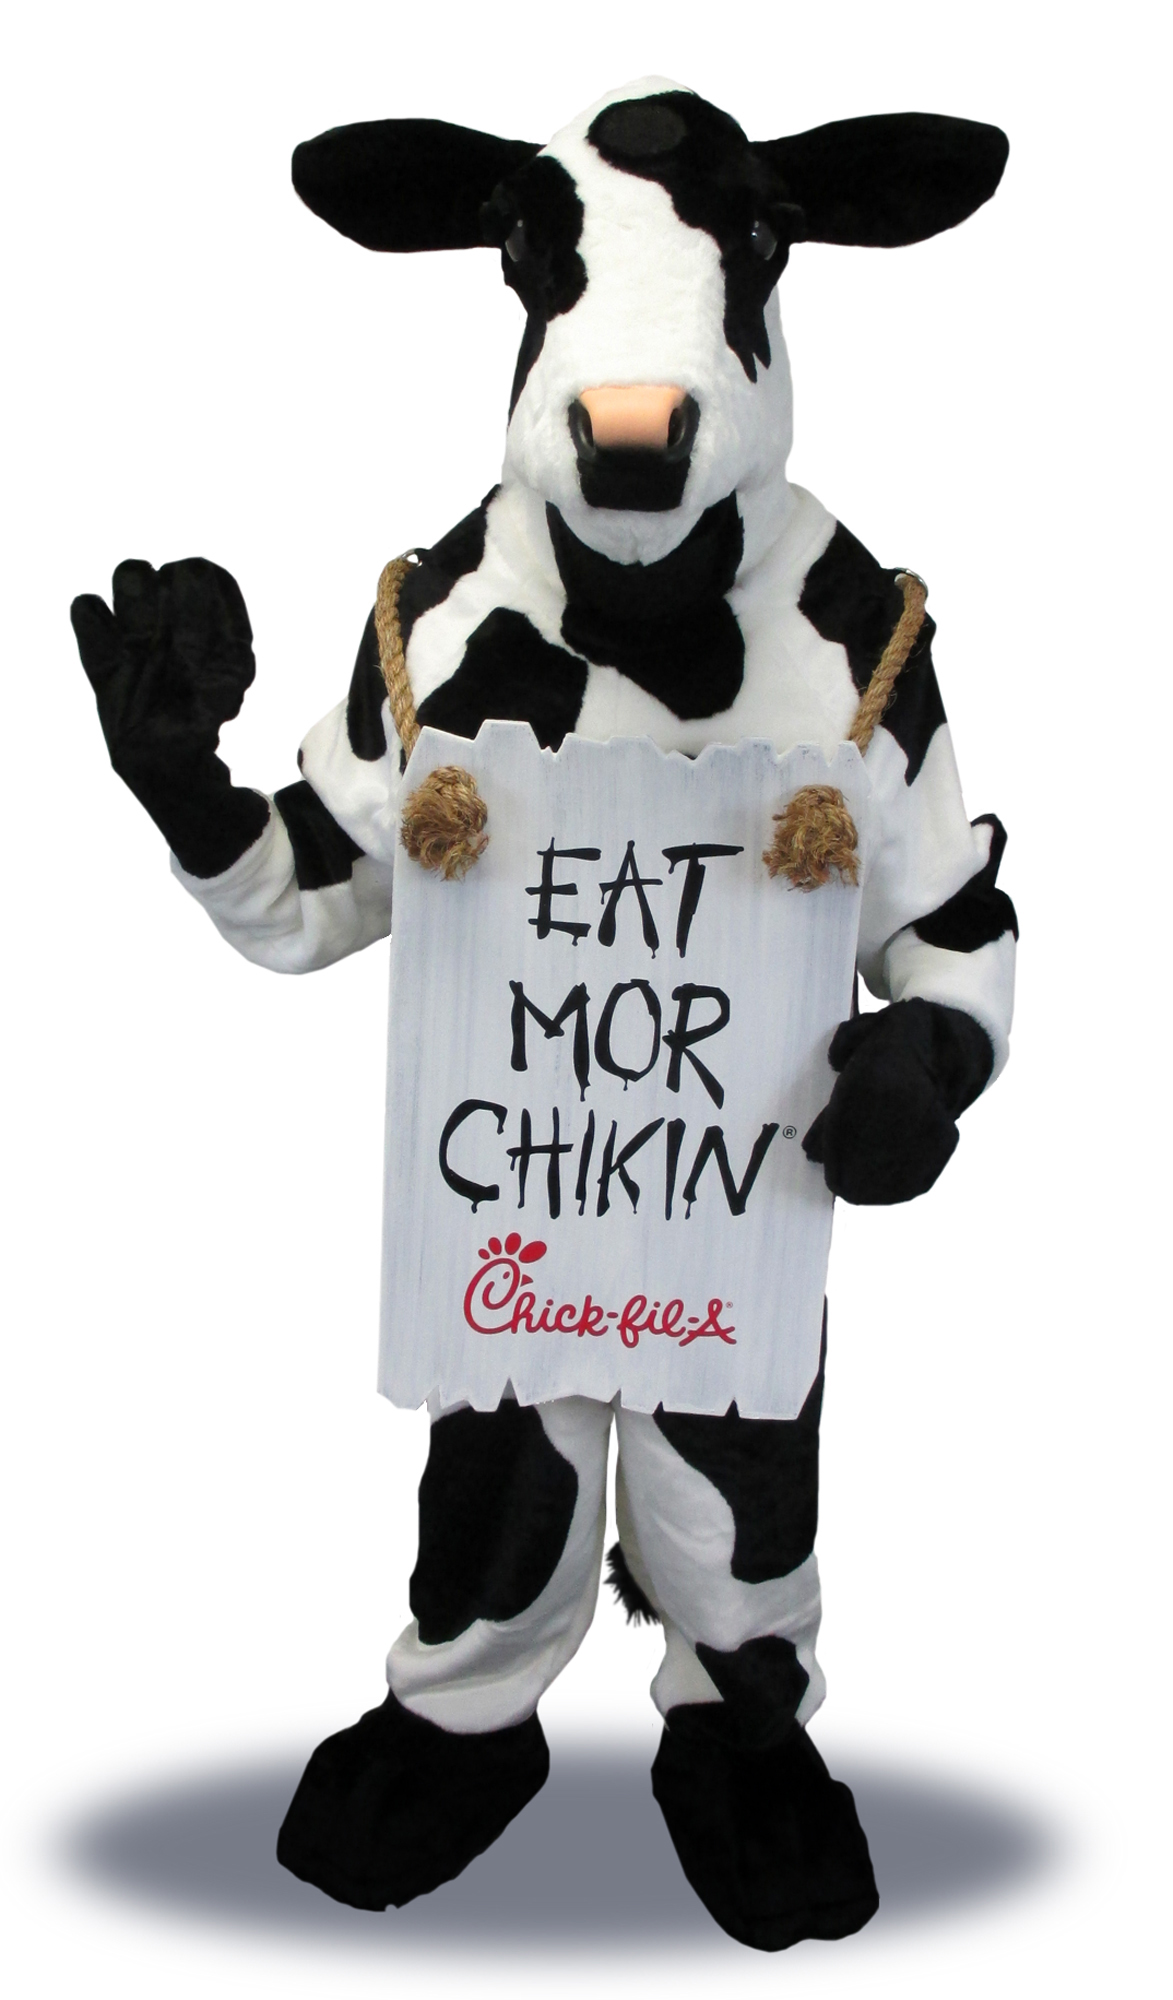 1997 – The first cow costume debuts